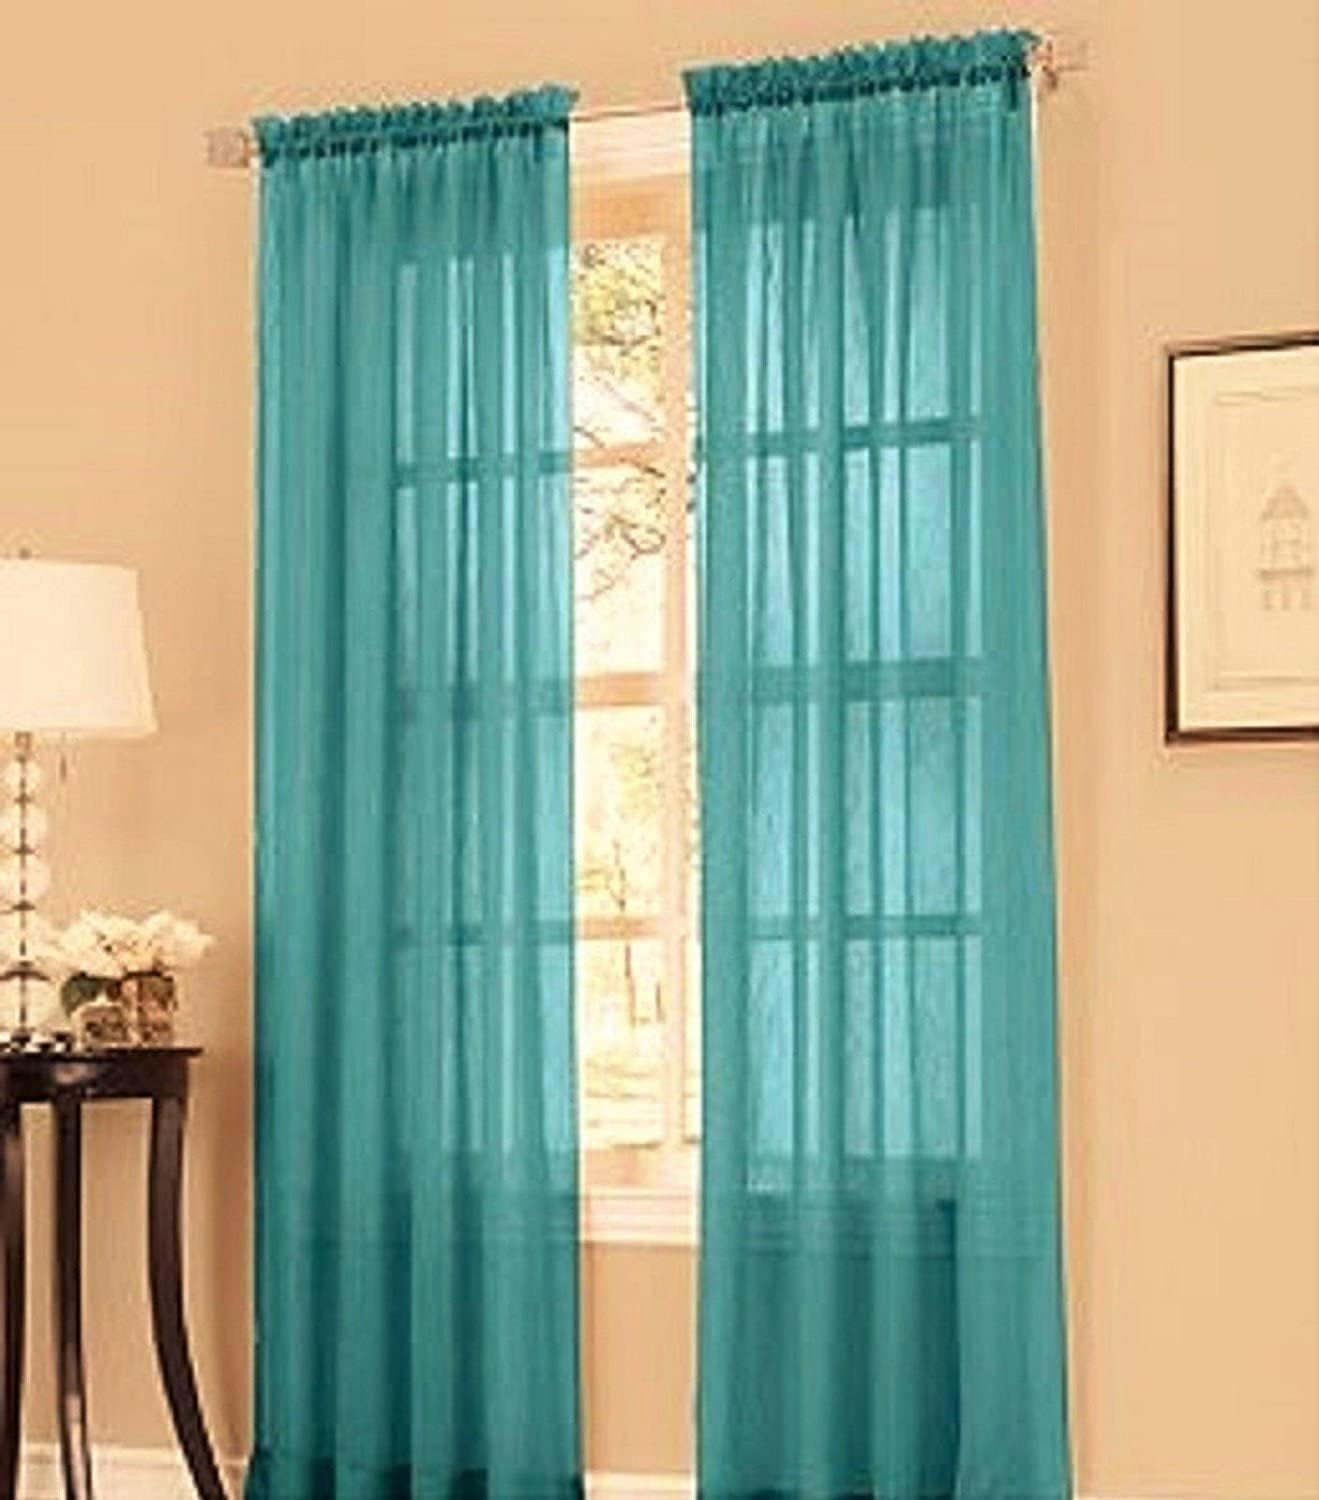 2 Piece Sheer Luxury Curtain Panel Set for Kitchen/Bedroom/Backdrop 84" Inches Long (White )  Jasmine Linen Teal  